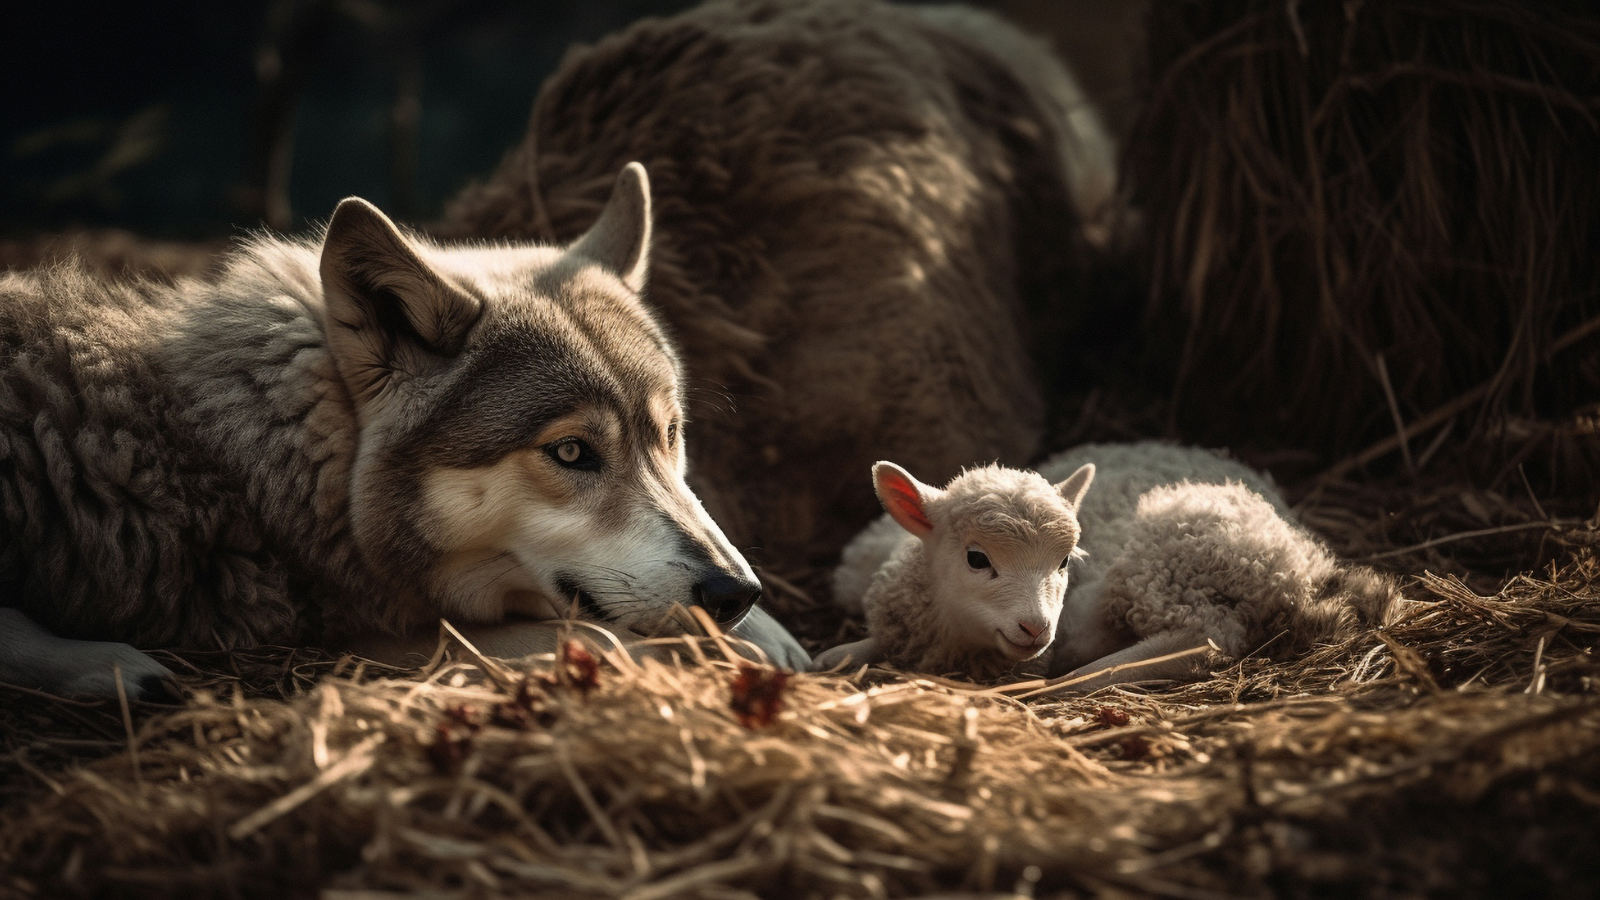 A wolf laying with a sheep.